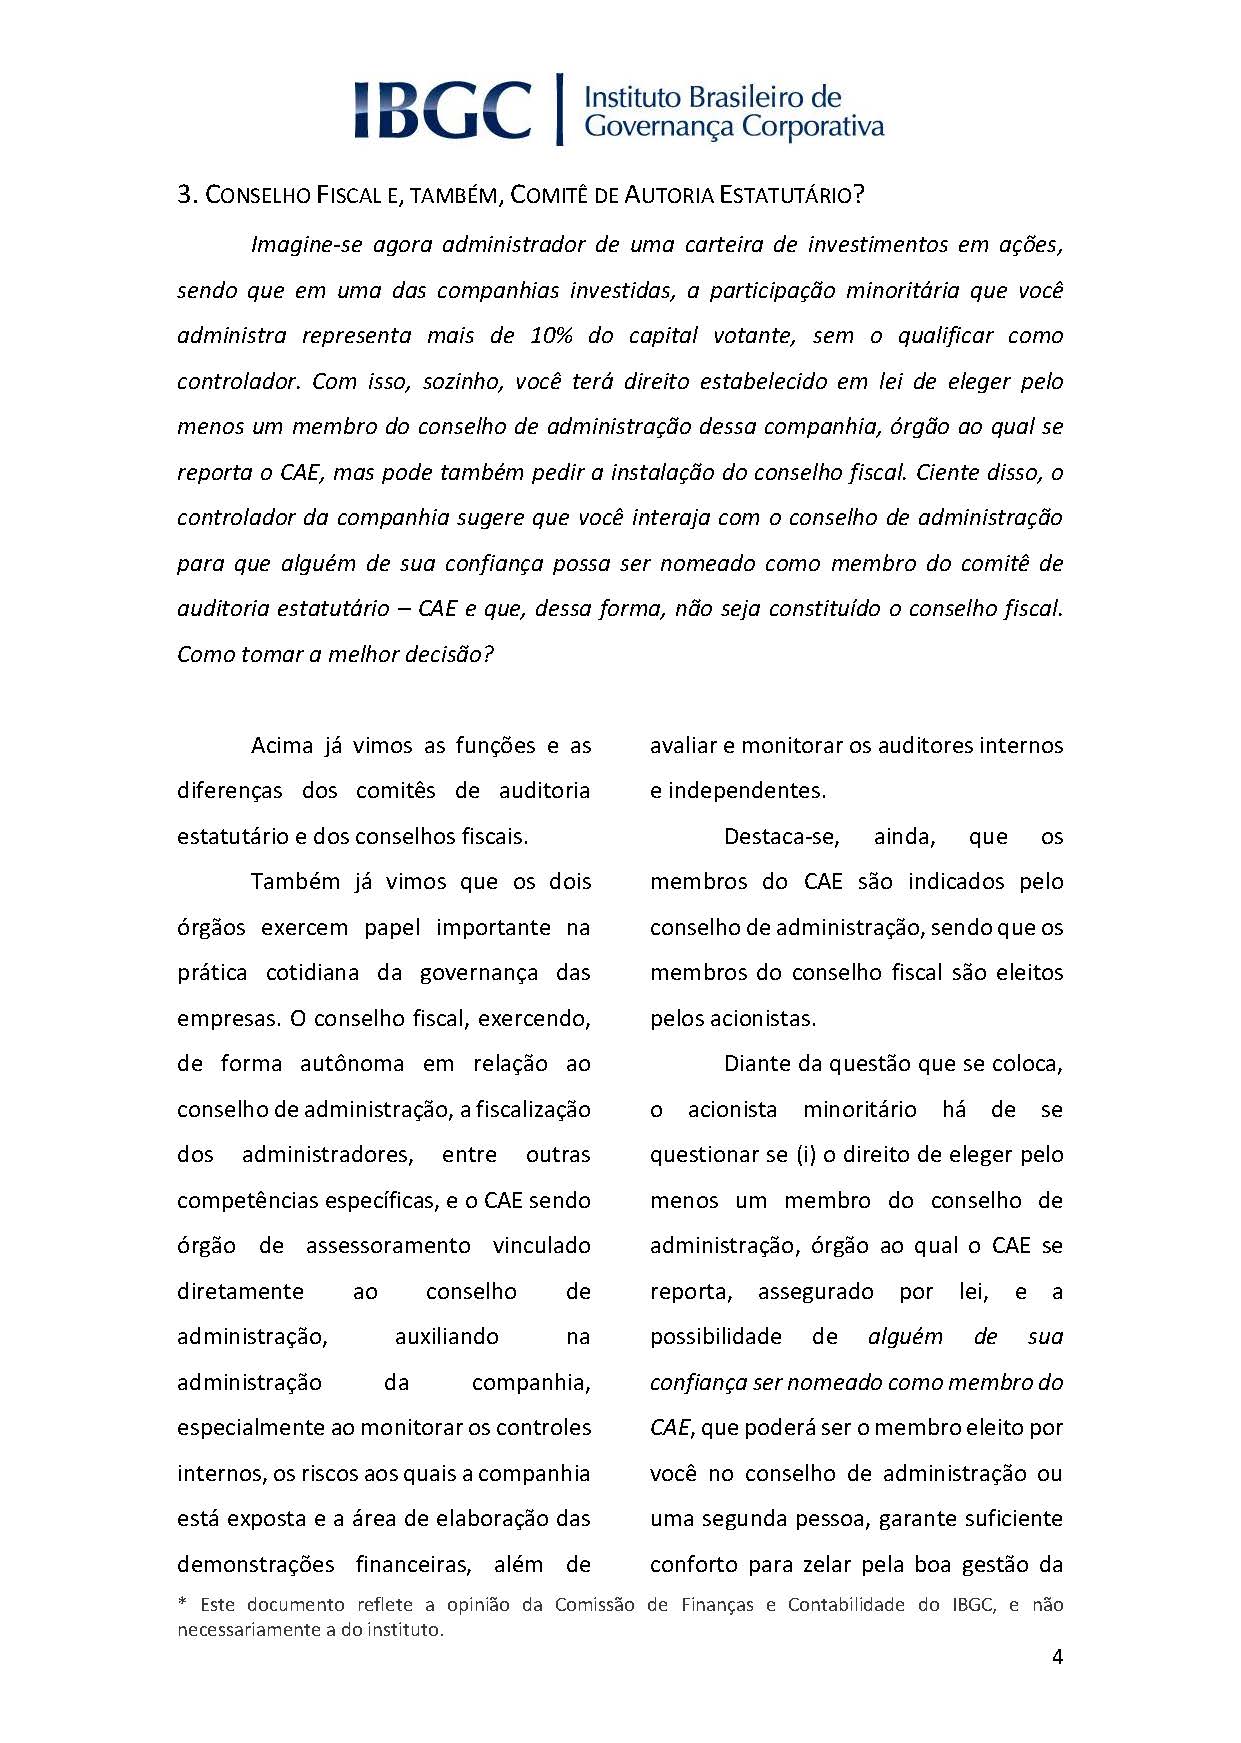 Publicacao-IBGCDiscute-CAExCF_Page_4